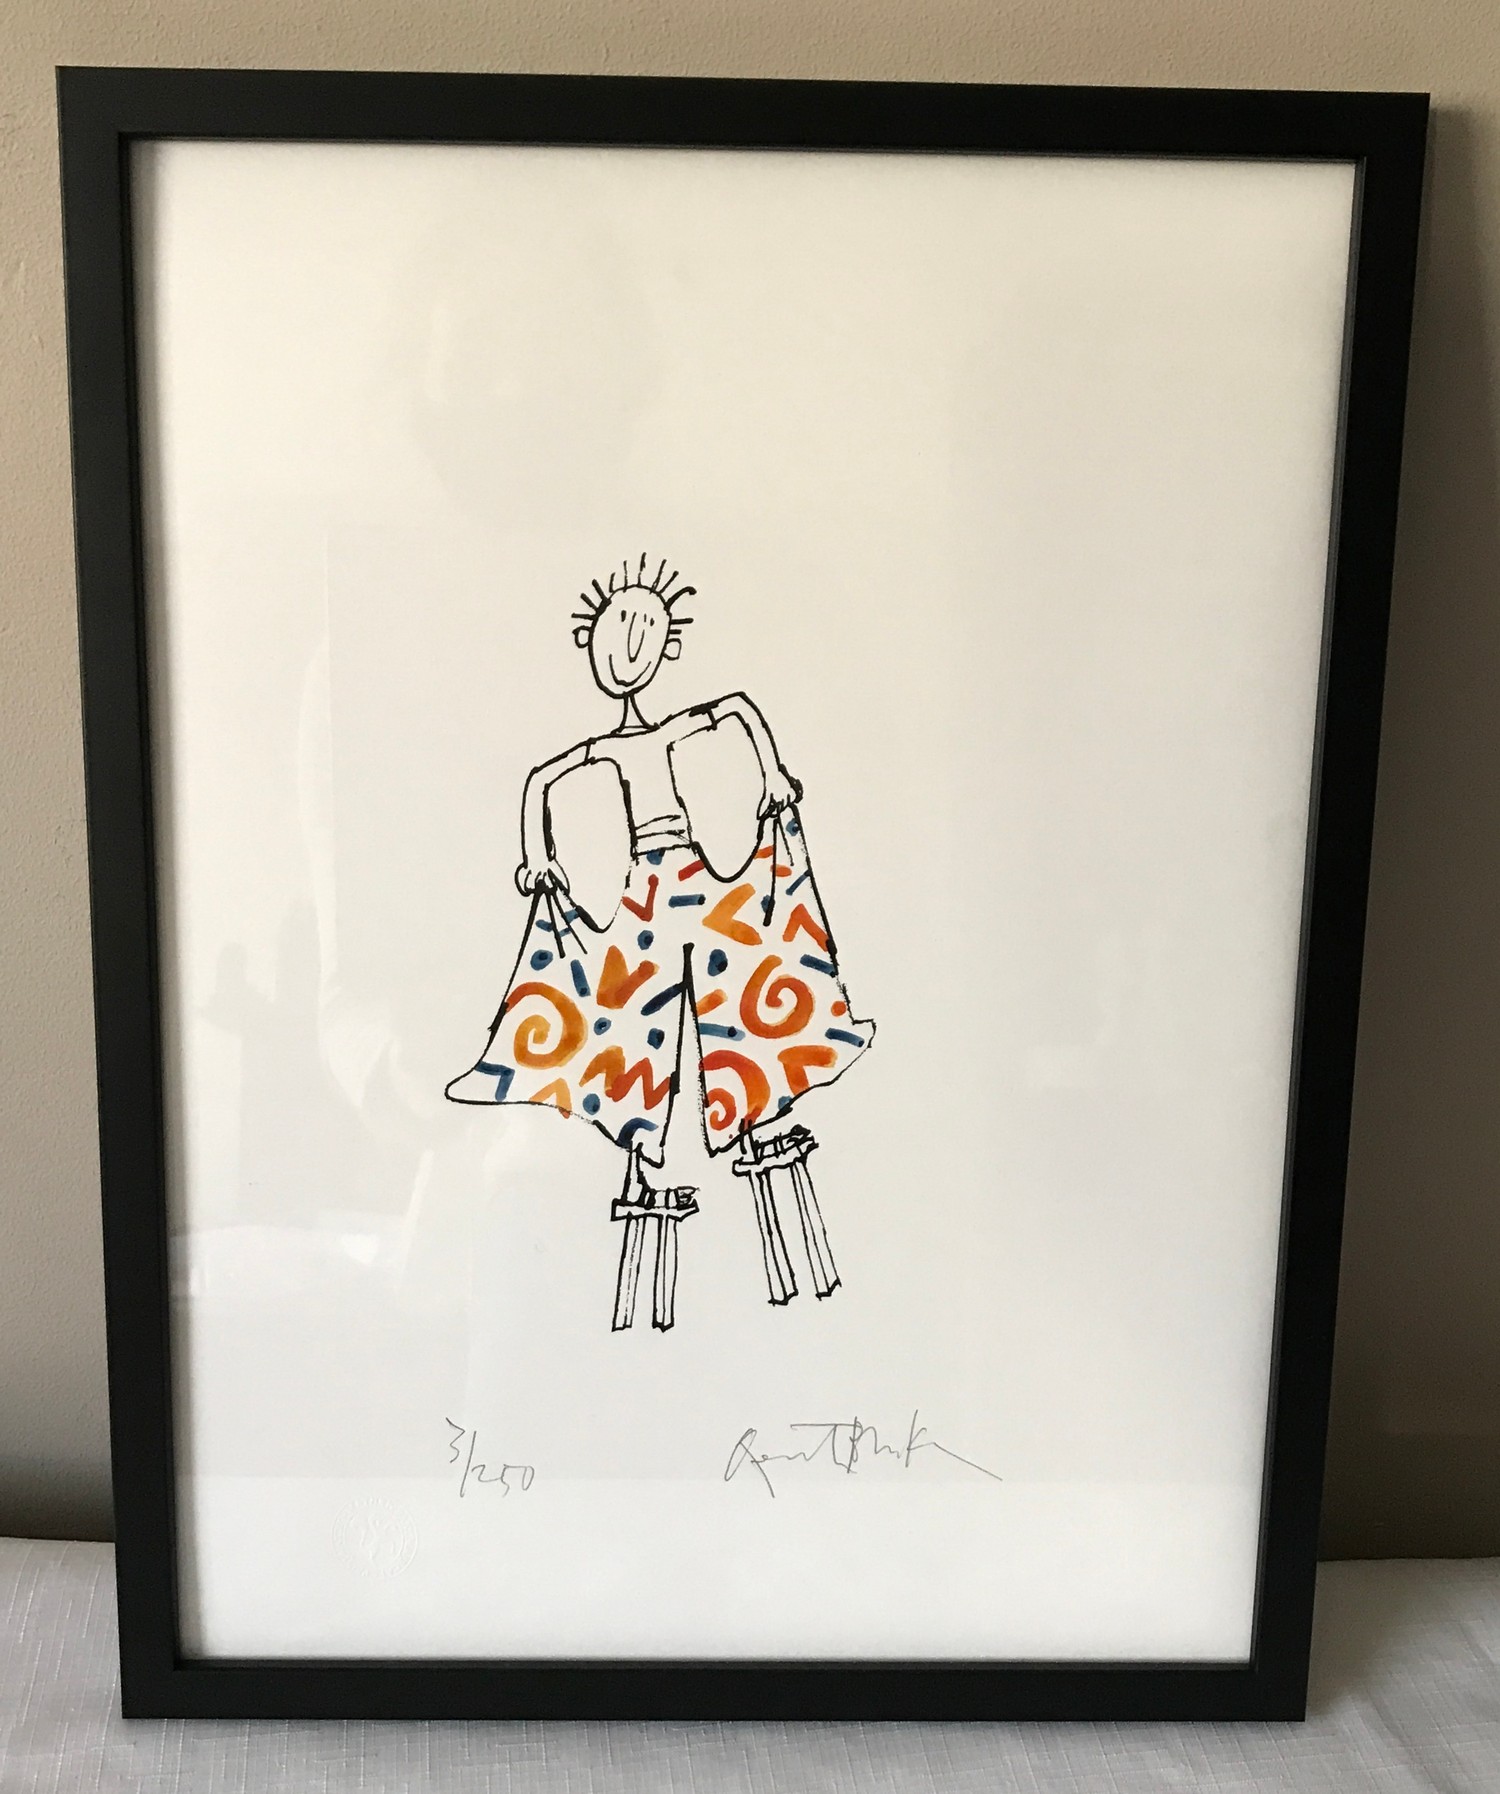 A mounted and framed Quentin Blake signed and stamped limited edition print 3/250 "Enormous